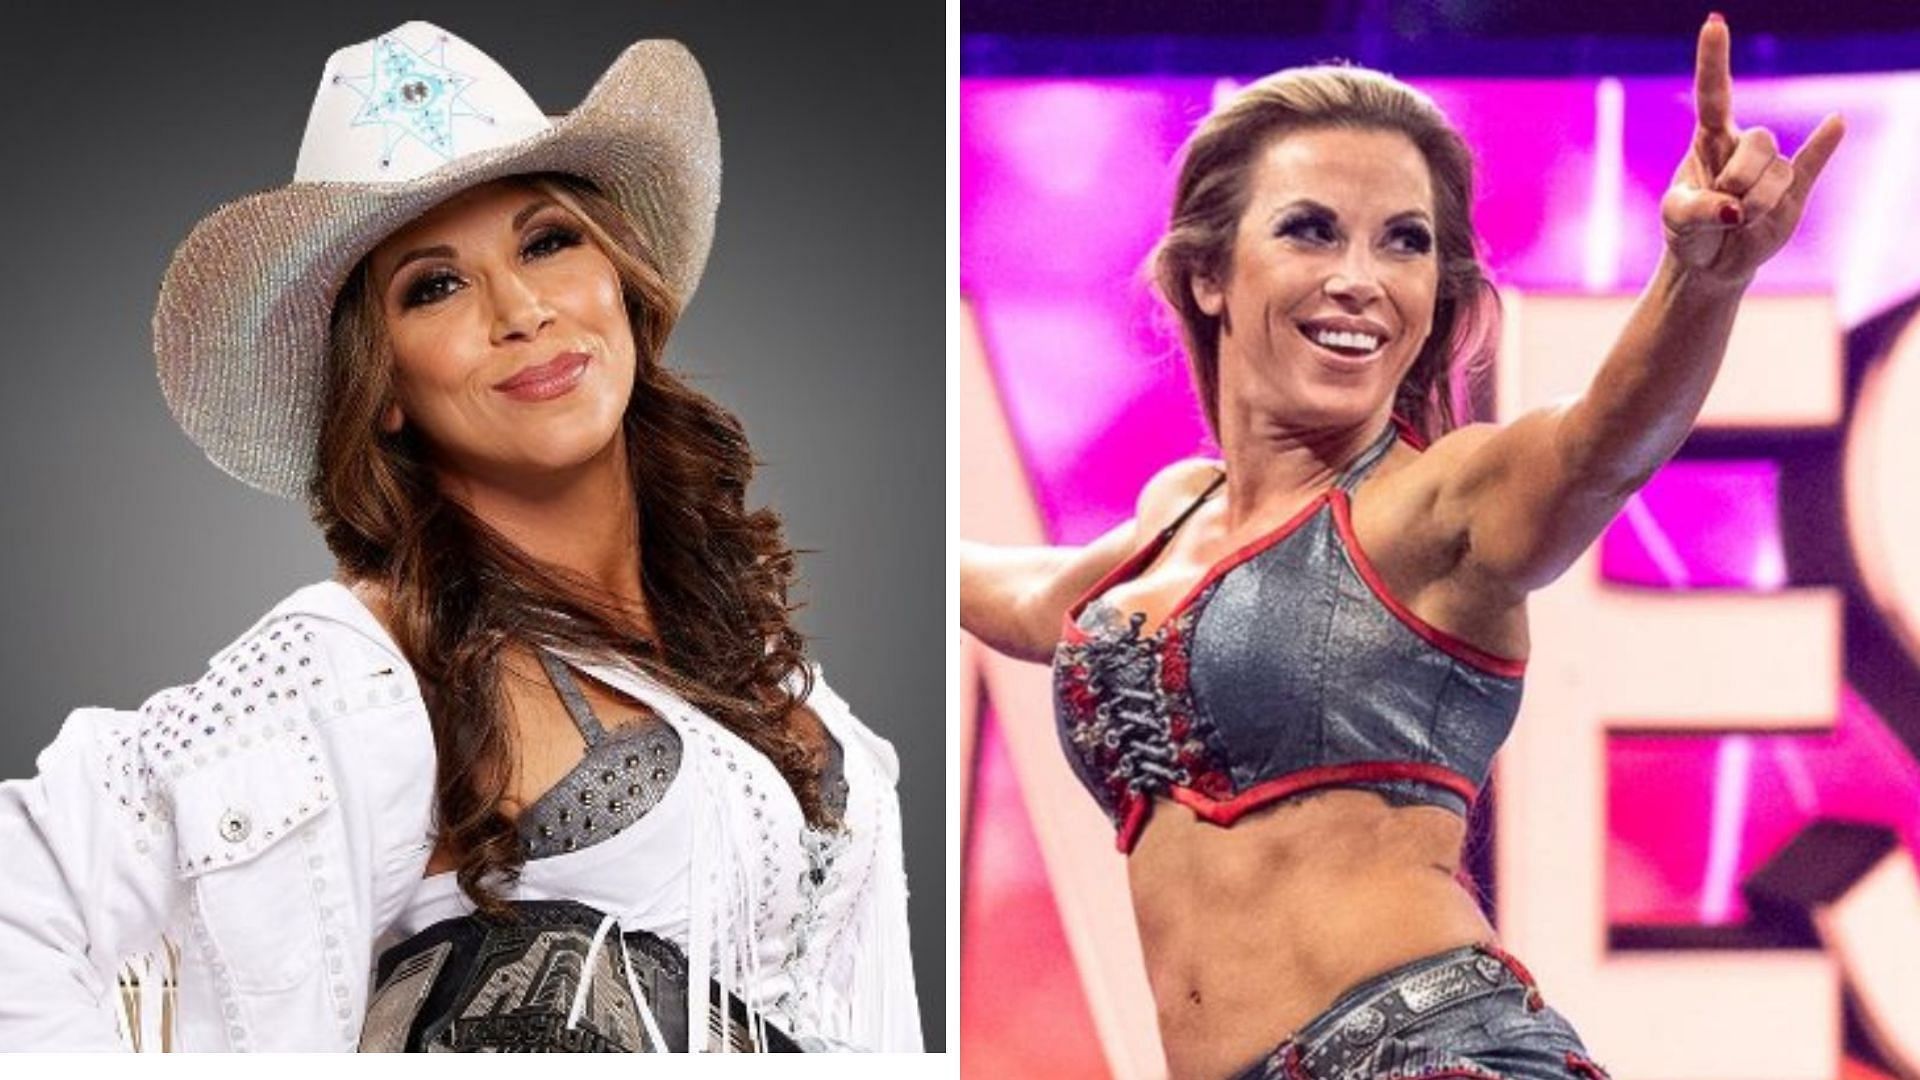 WWE legend Mickie James is currently signed with Impact Wrestling